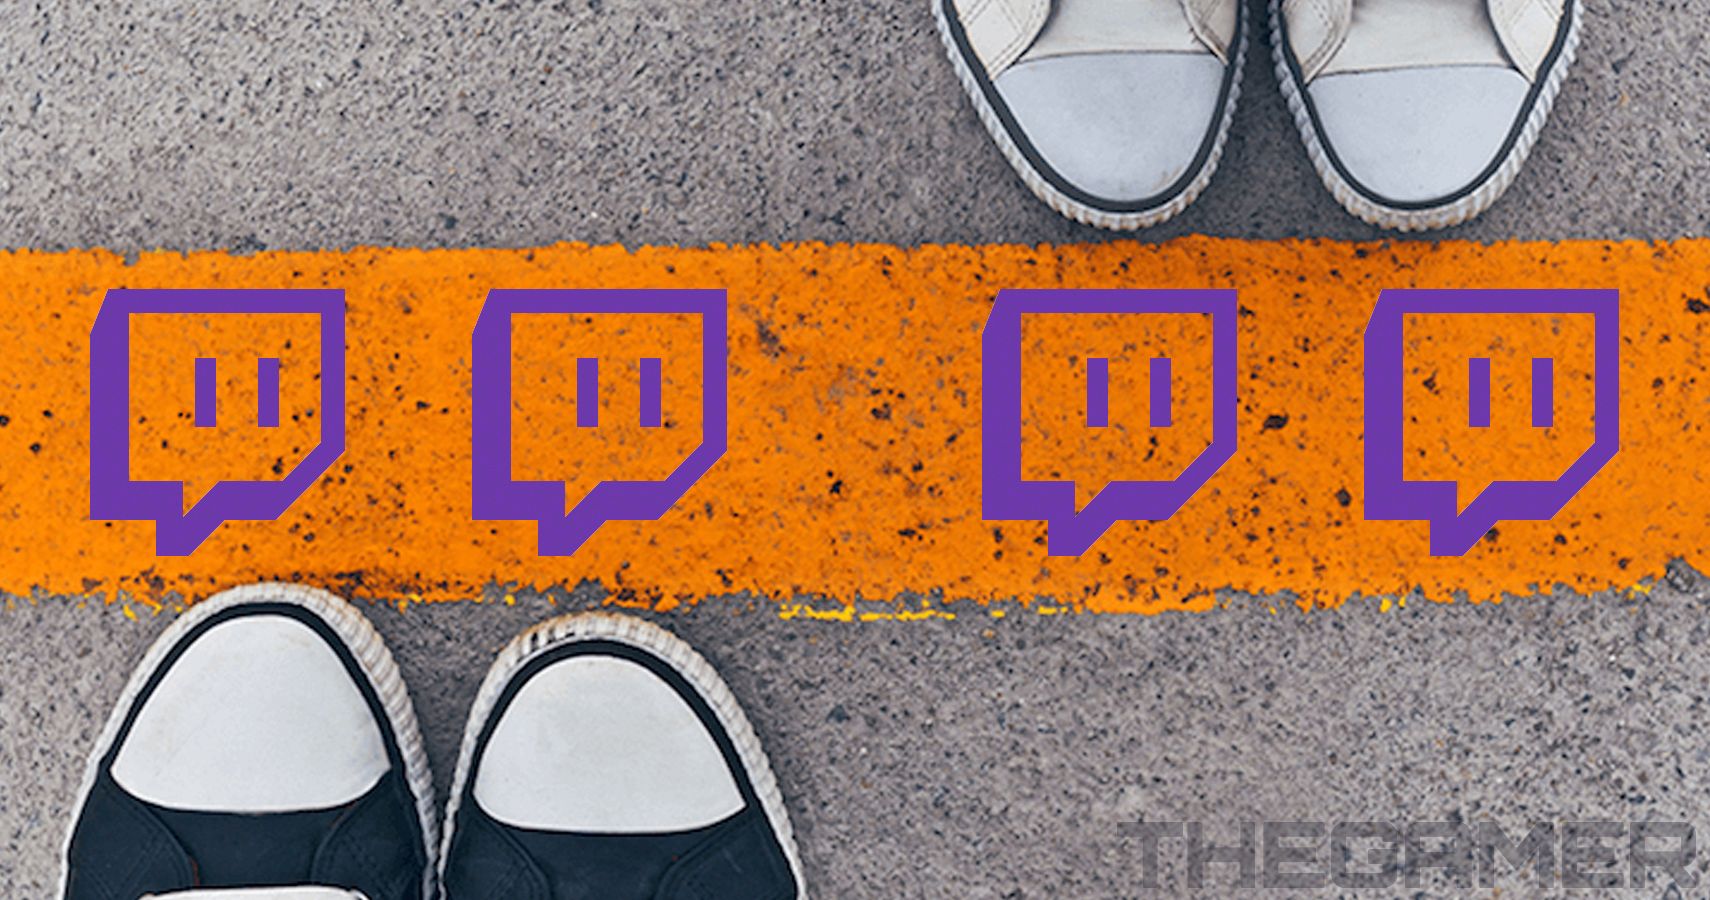 Two pairs of sneakers are on opposite sides of a boundary line that has Twitch logos on it.